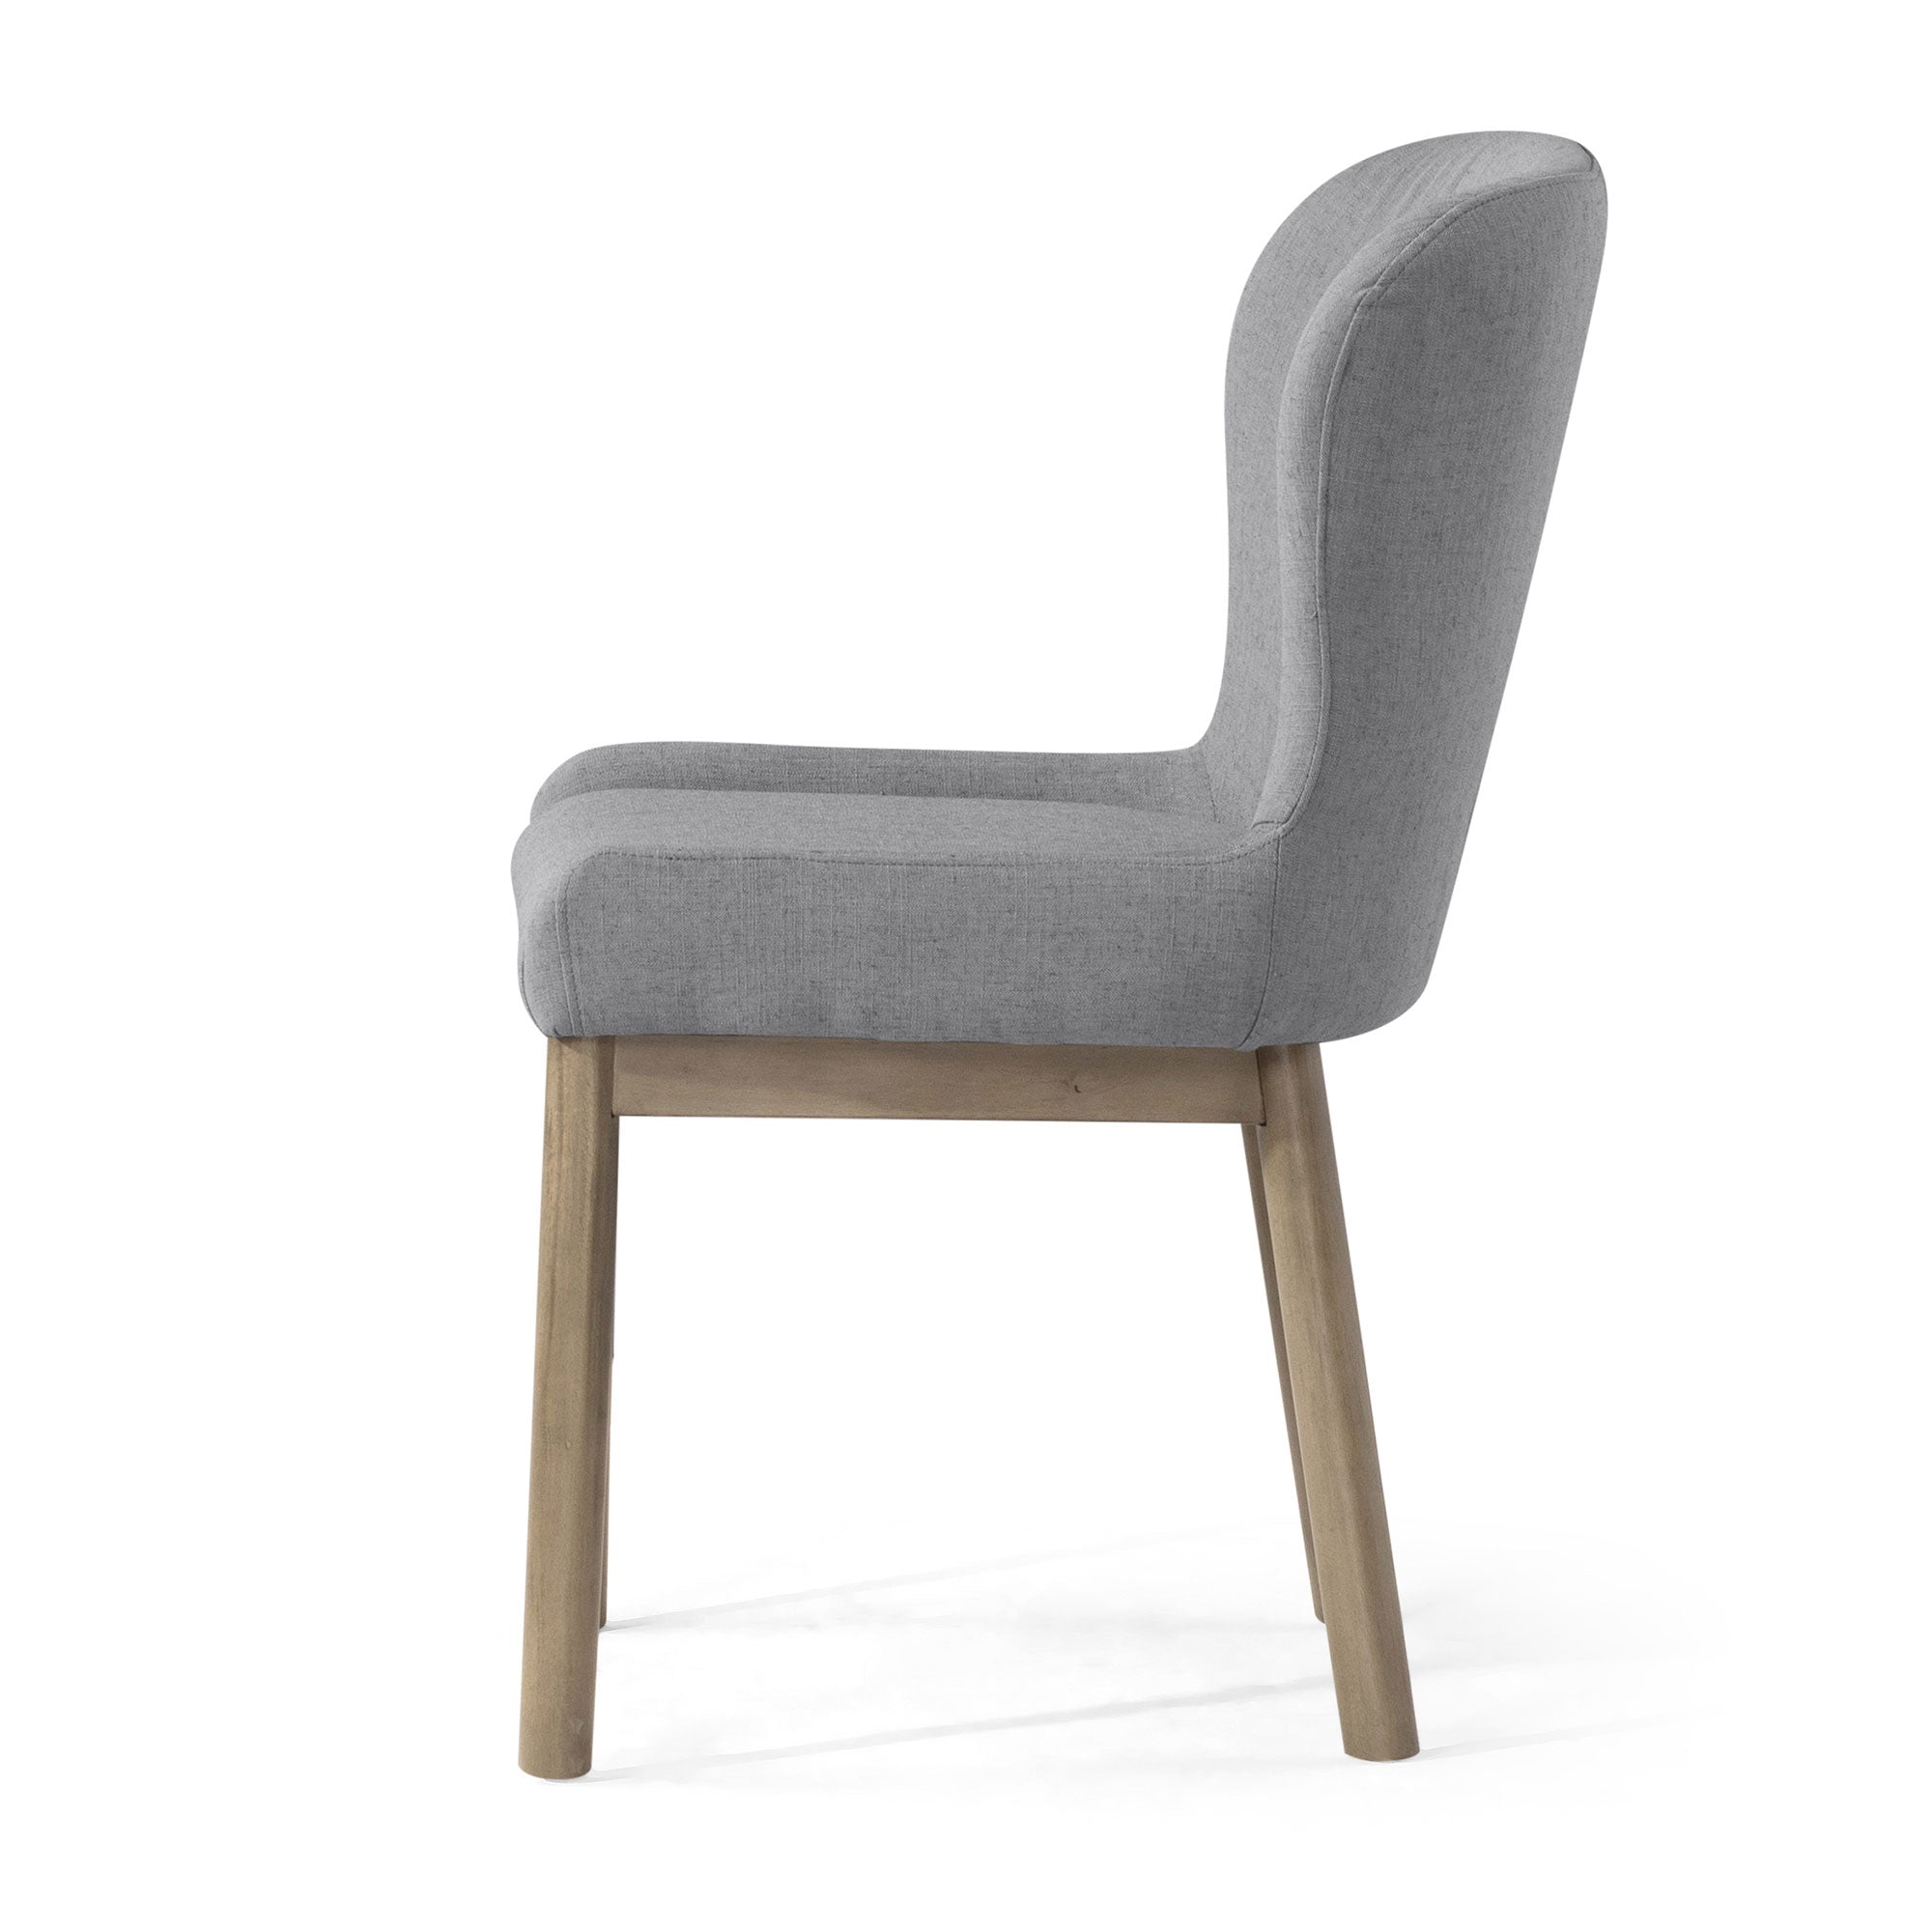 Gia Contemporary Wooden Dining Chair in Refined Grey Finish with Taupe Linen Fabric Upholstery, Set of 2 in Dining Furniture by Maven Lane